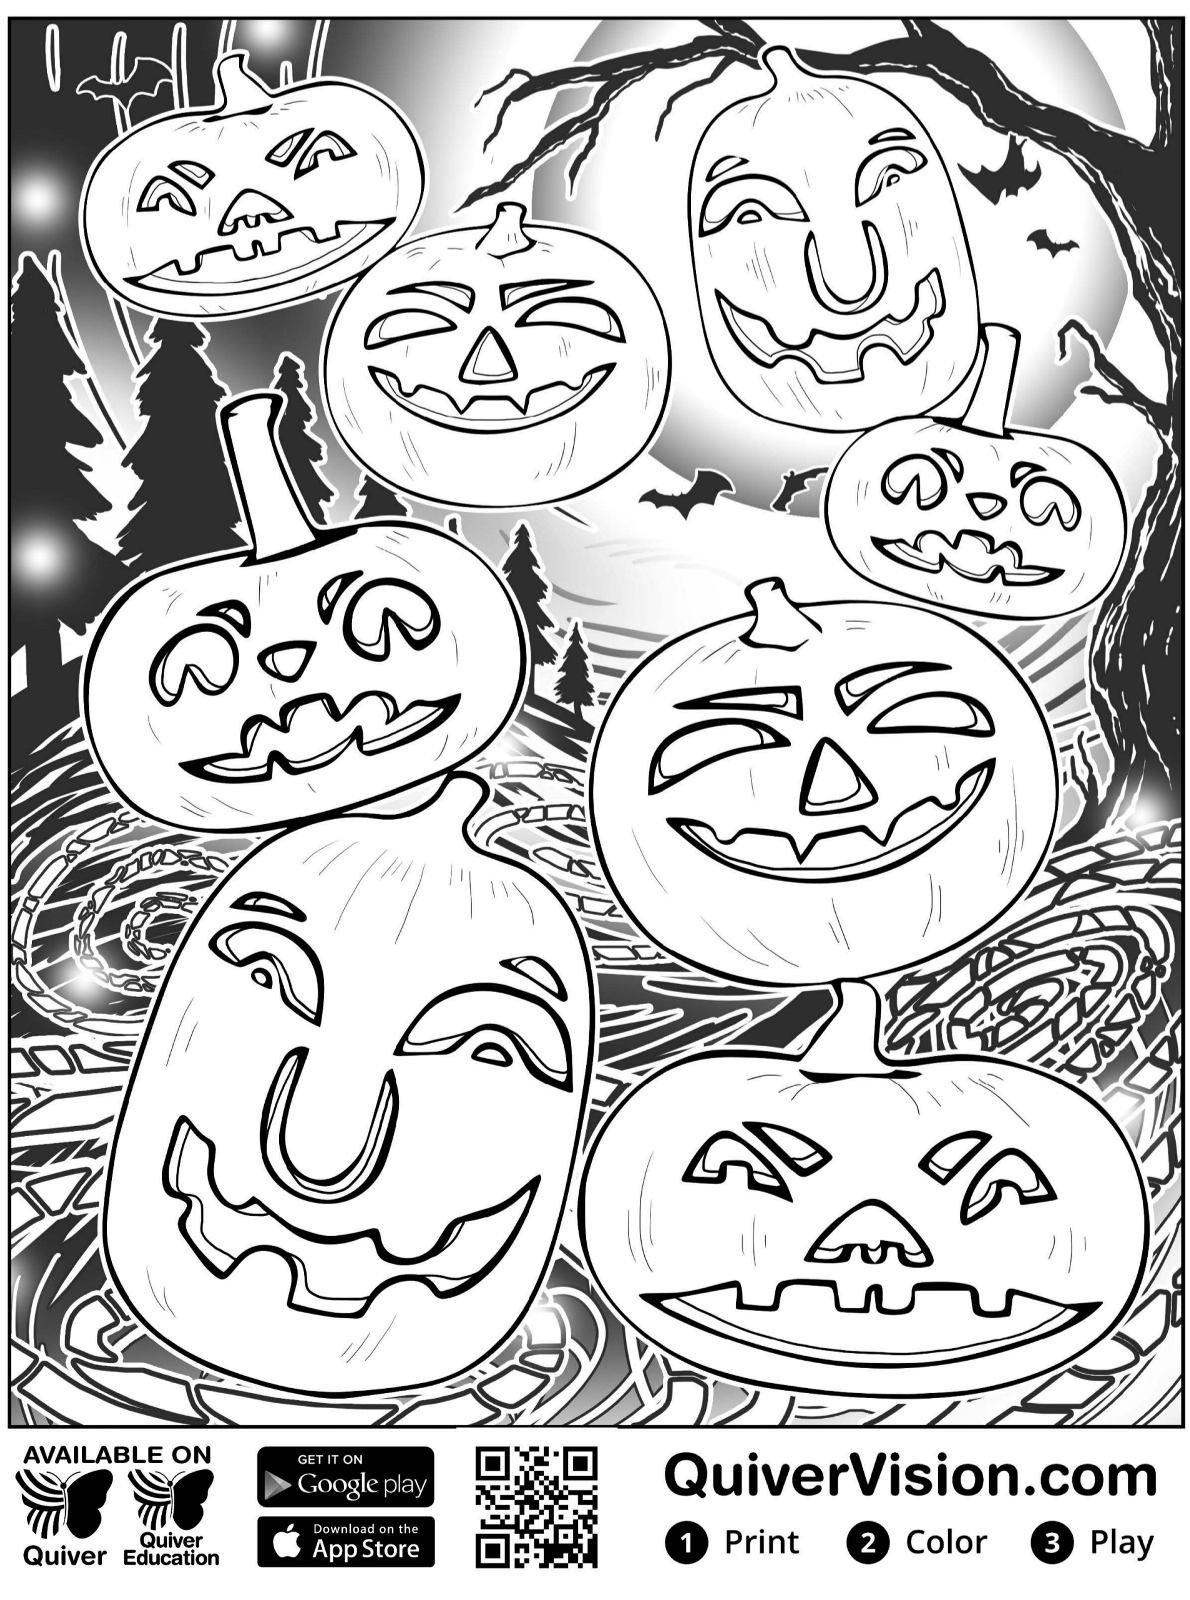 Kids n fun.com   Coloring page Quiver halloween